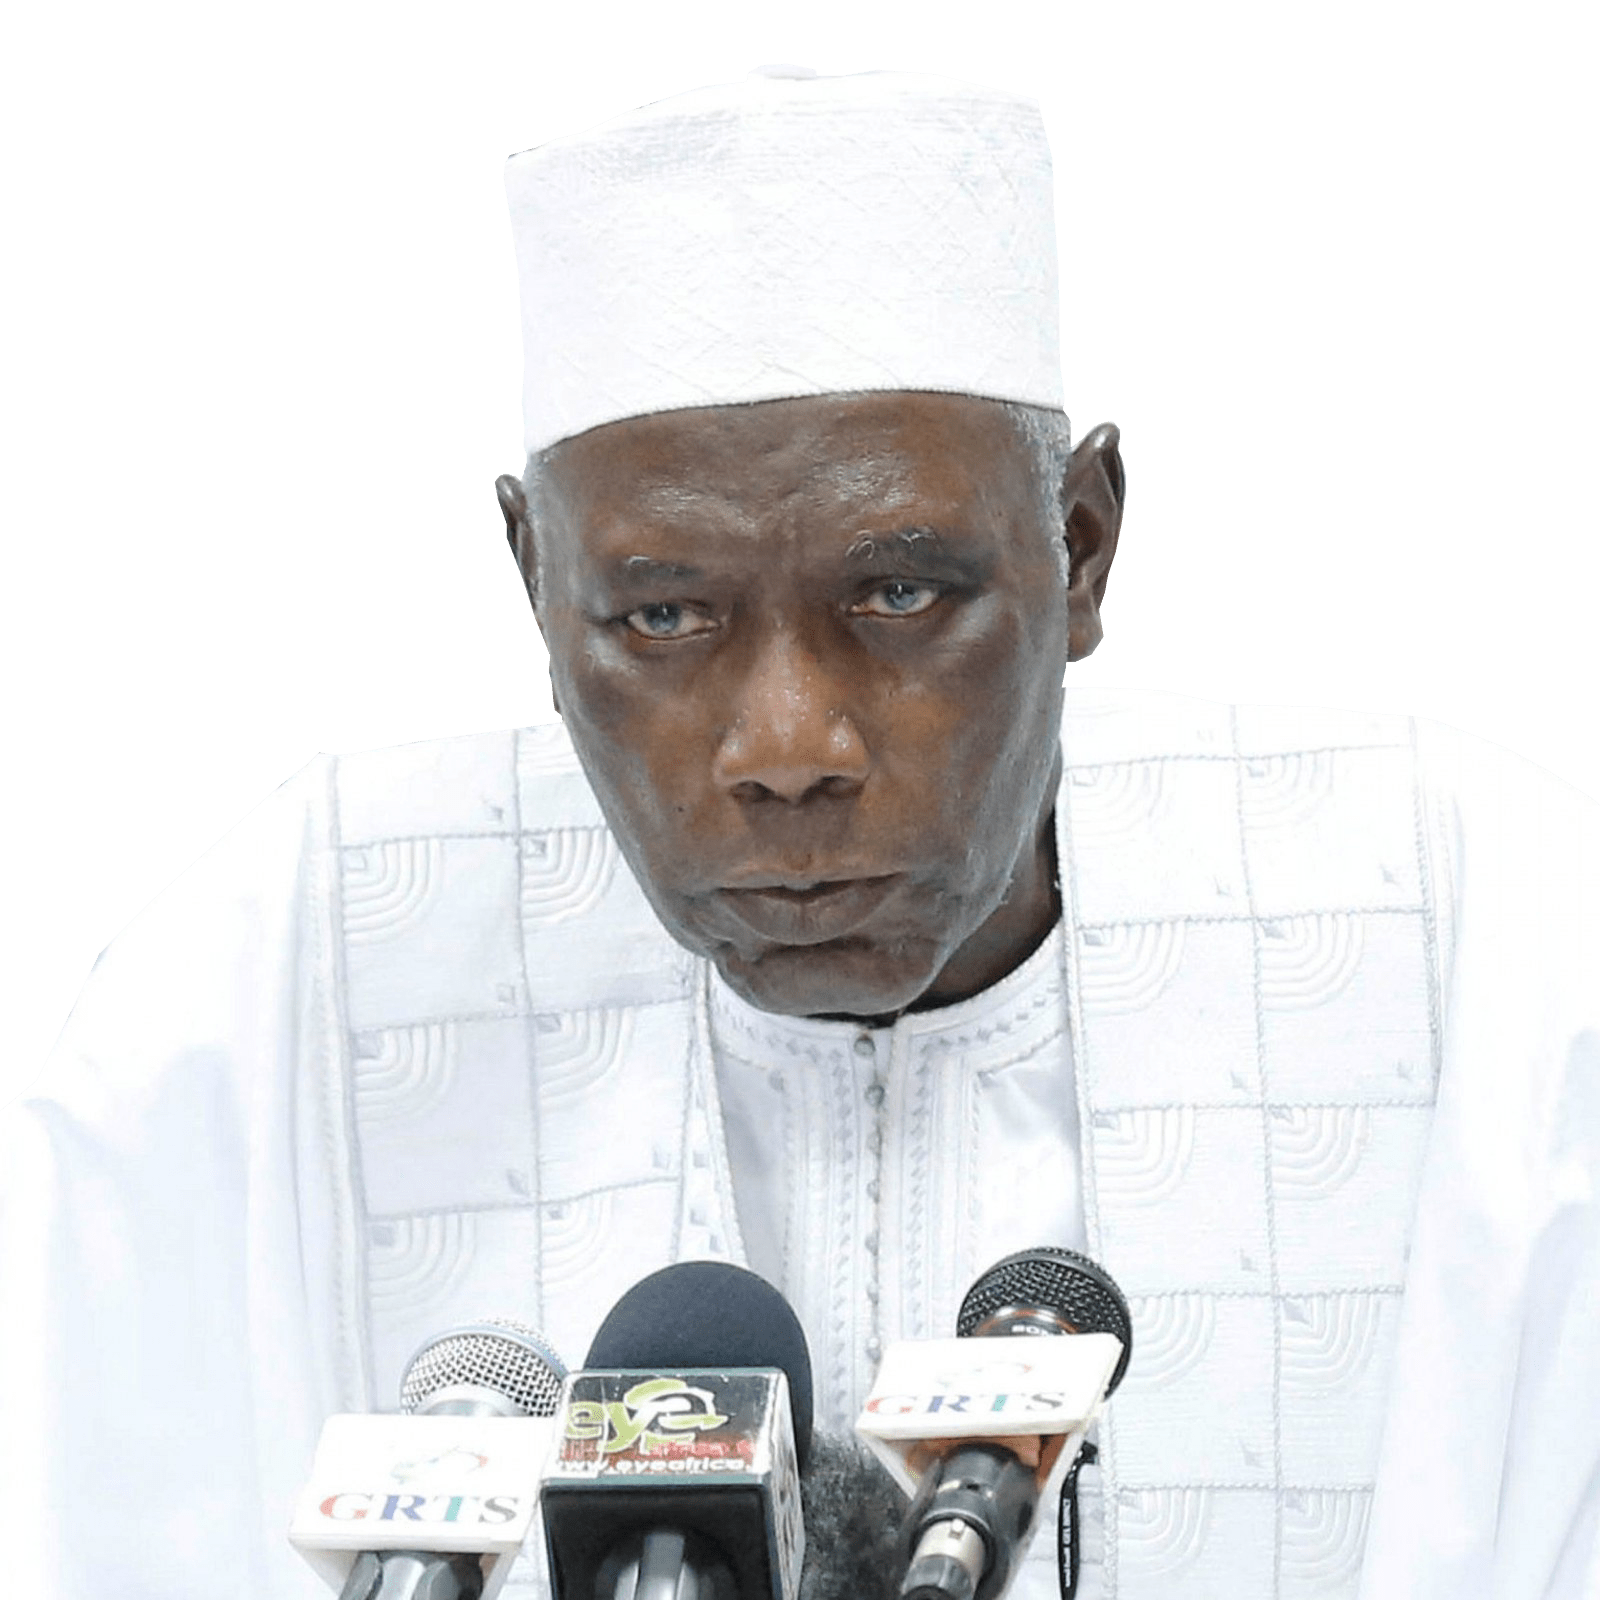 IEC CONFIRMS GAMBIA WILL MIGRATE TO PAPER BALLOT